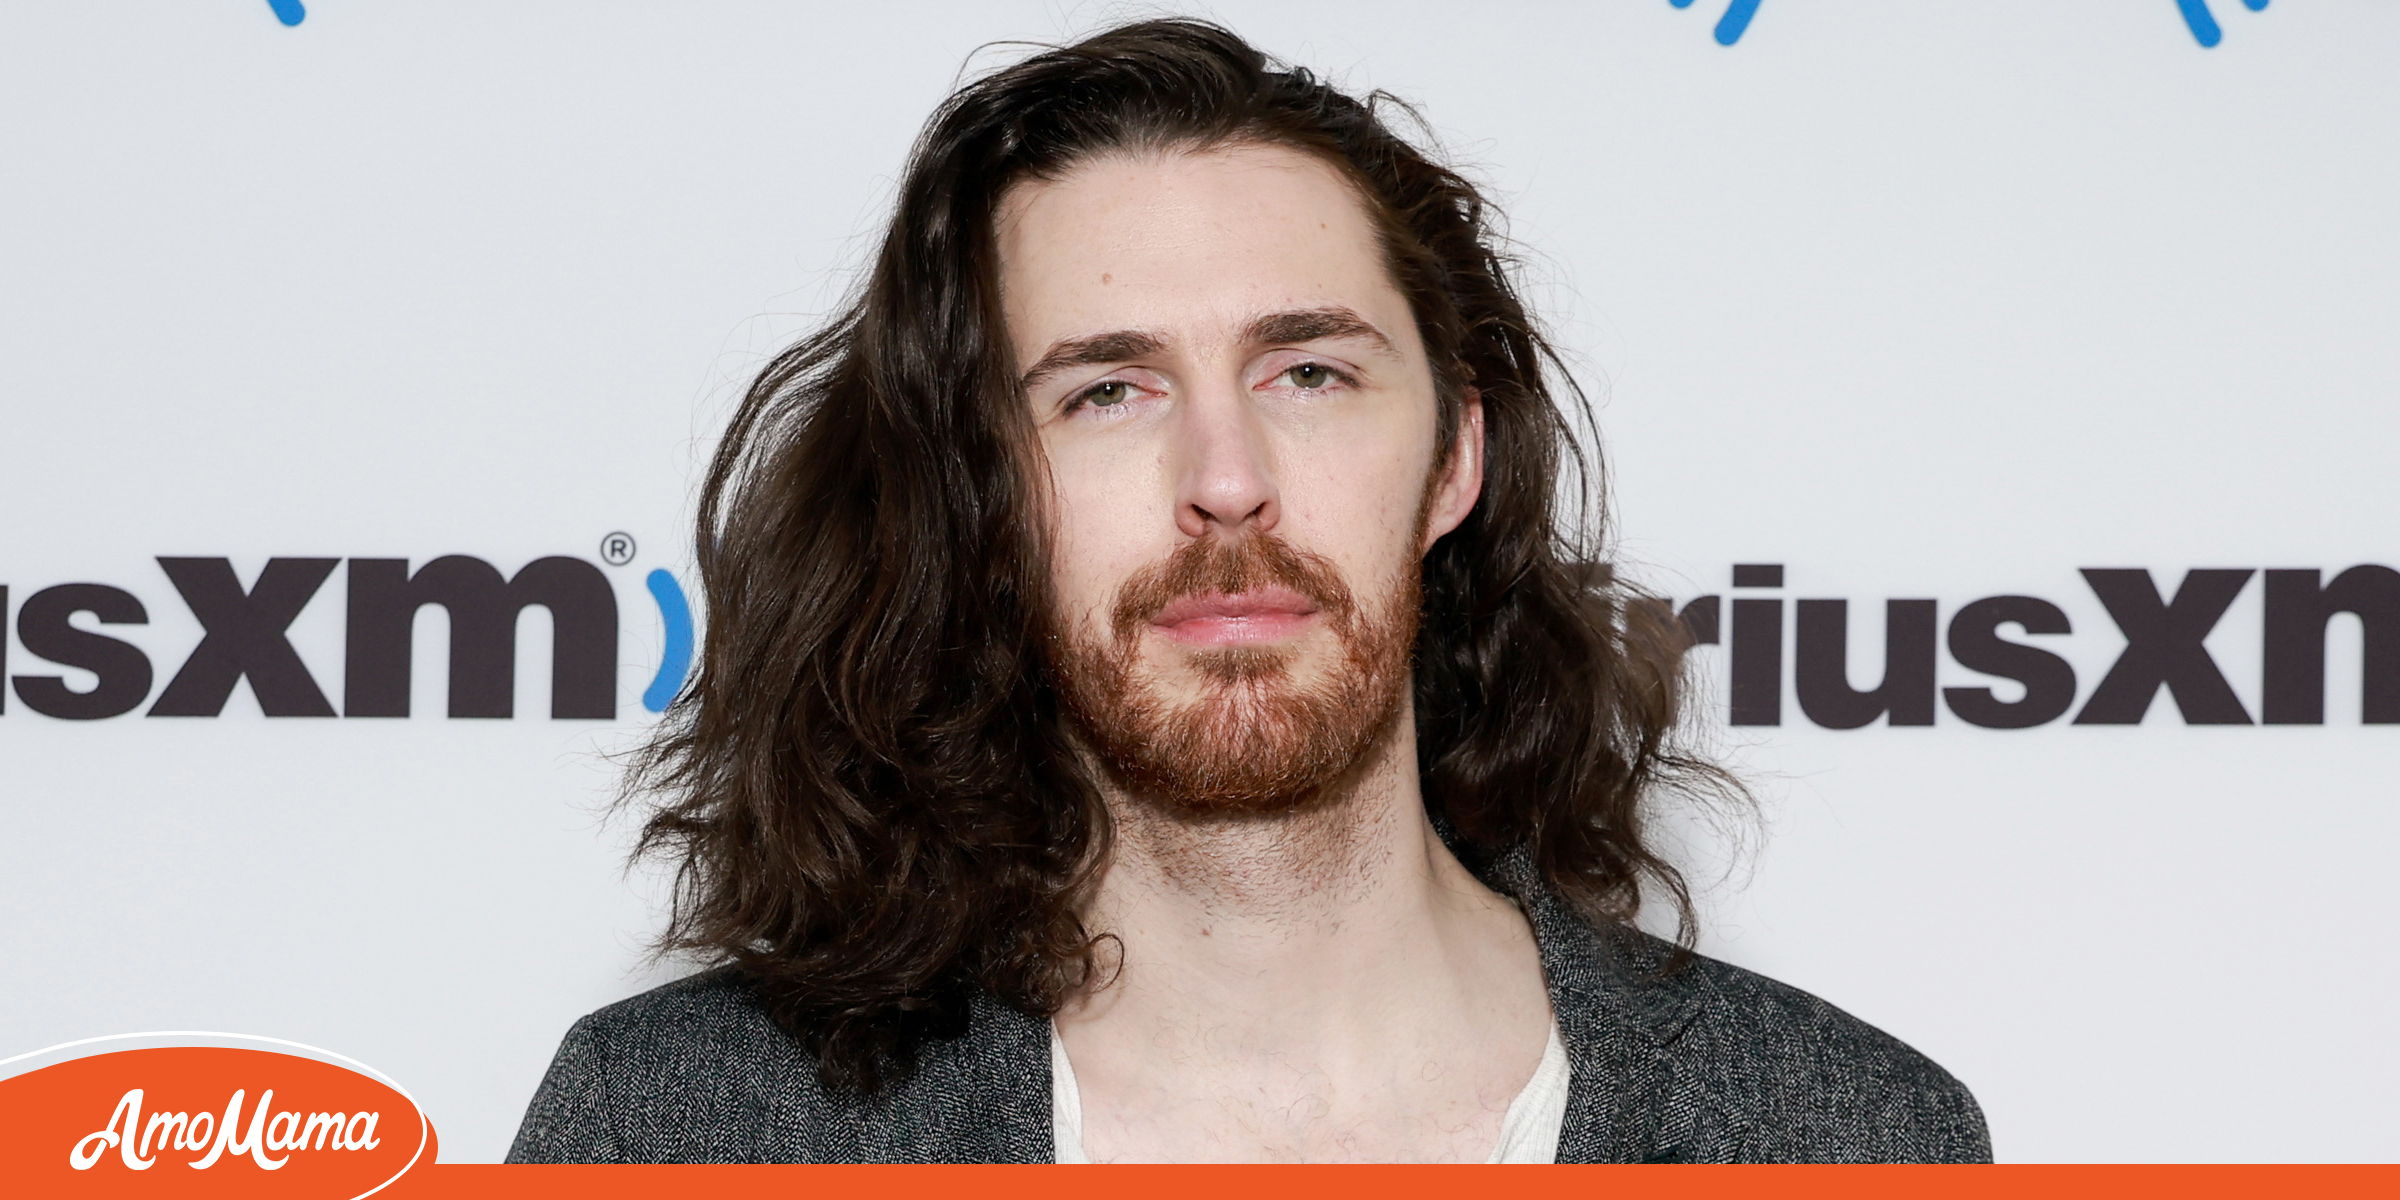 Is Hozier Gay? The Singer's Sexuality and Dating Life Explored